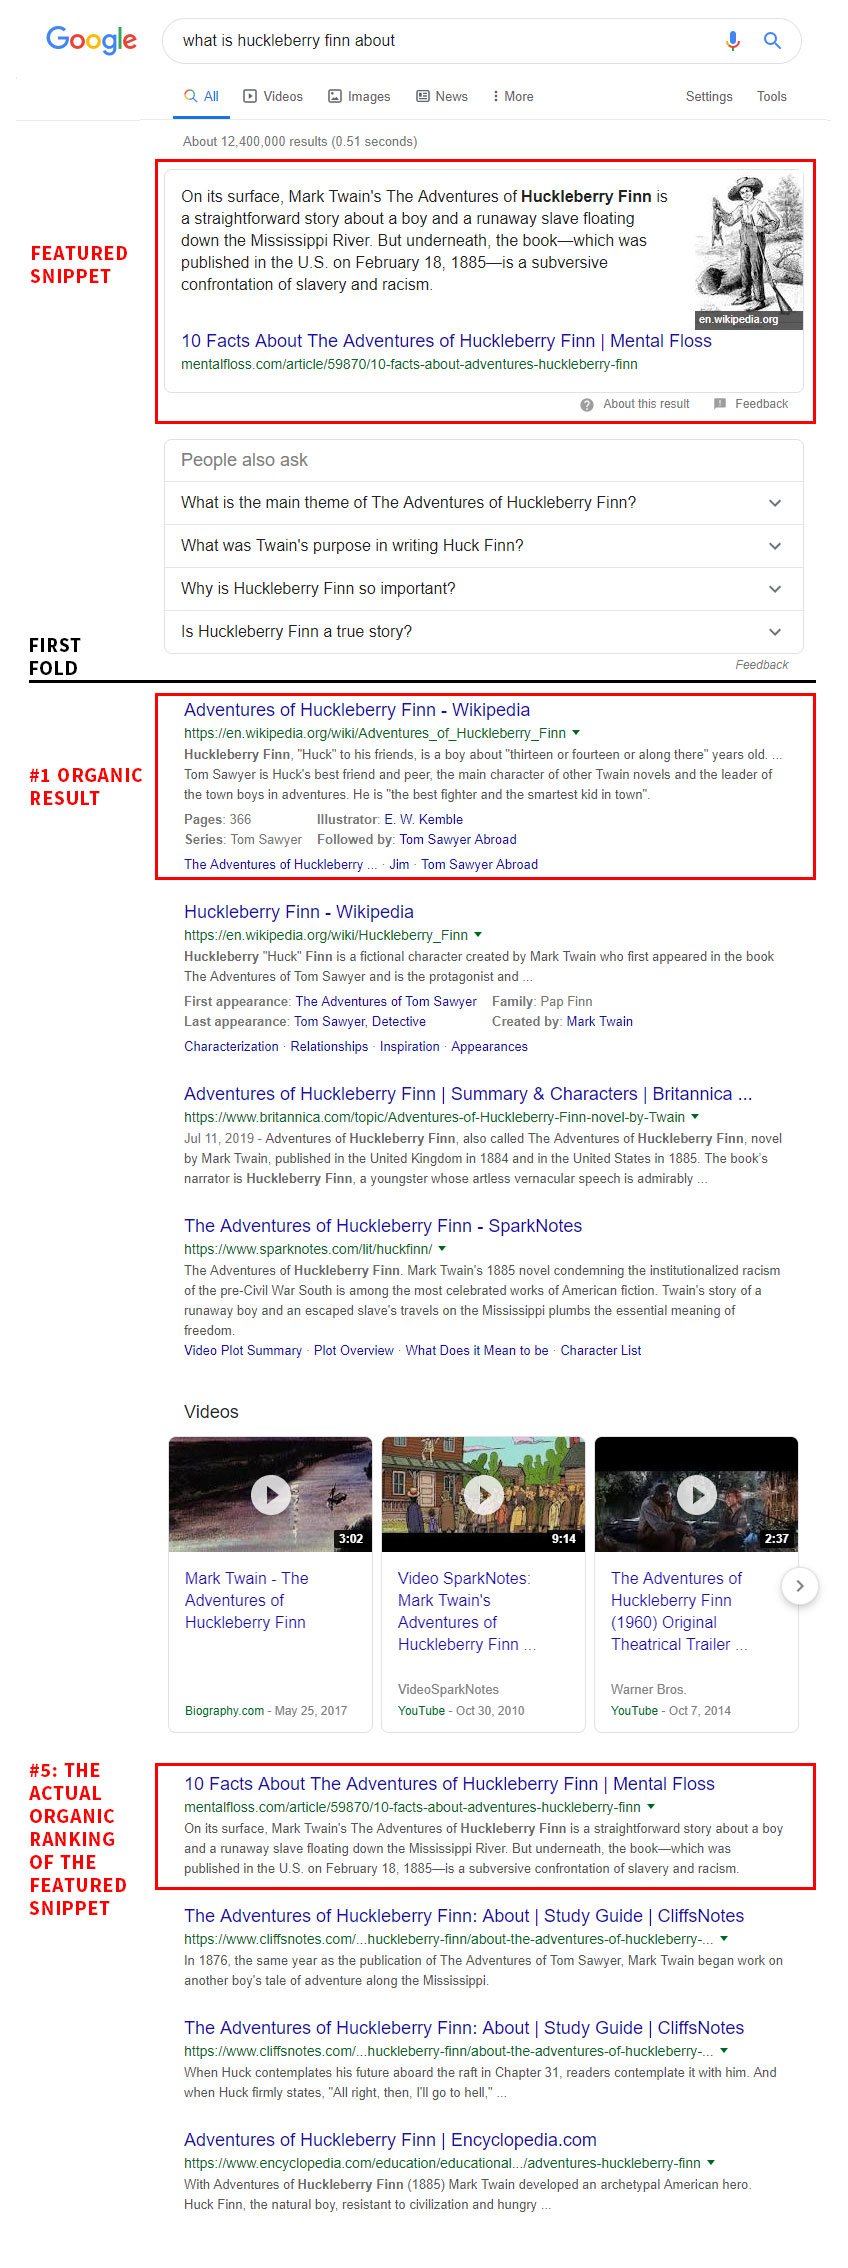 A pre-January 2020 featured snippet